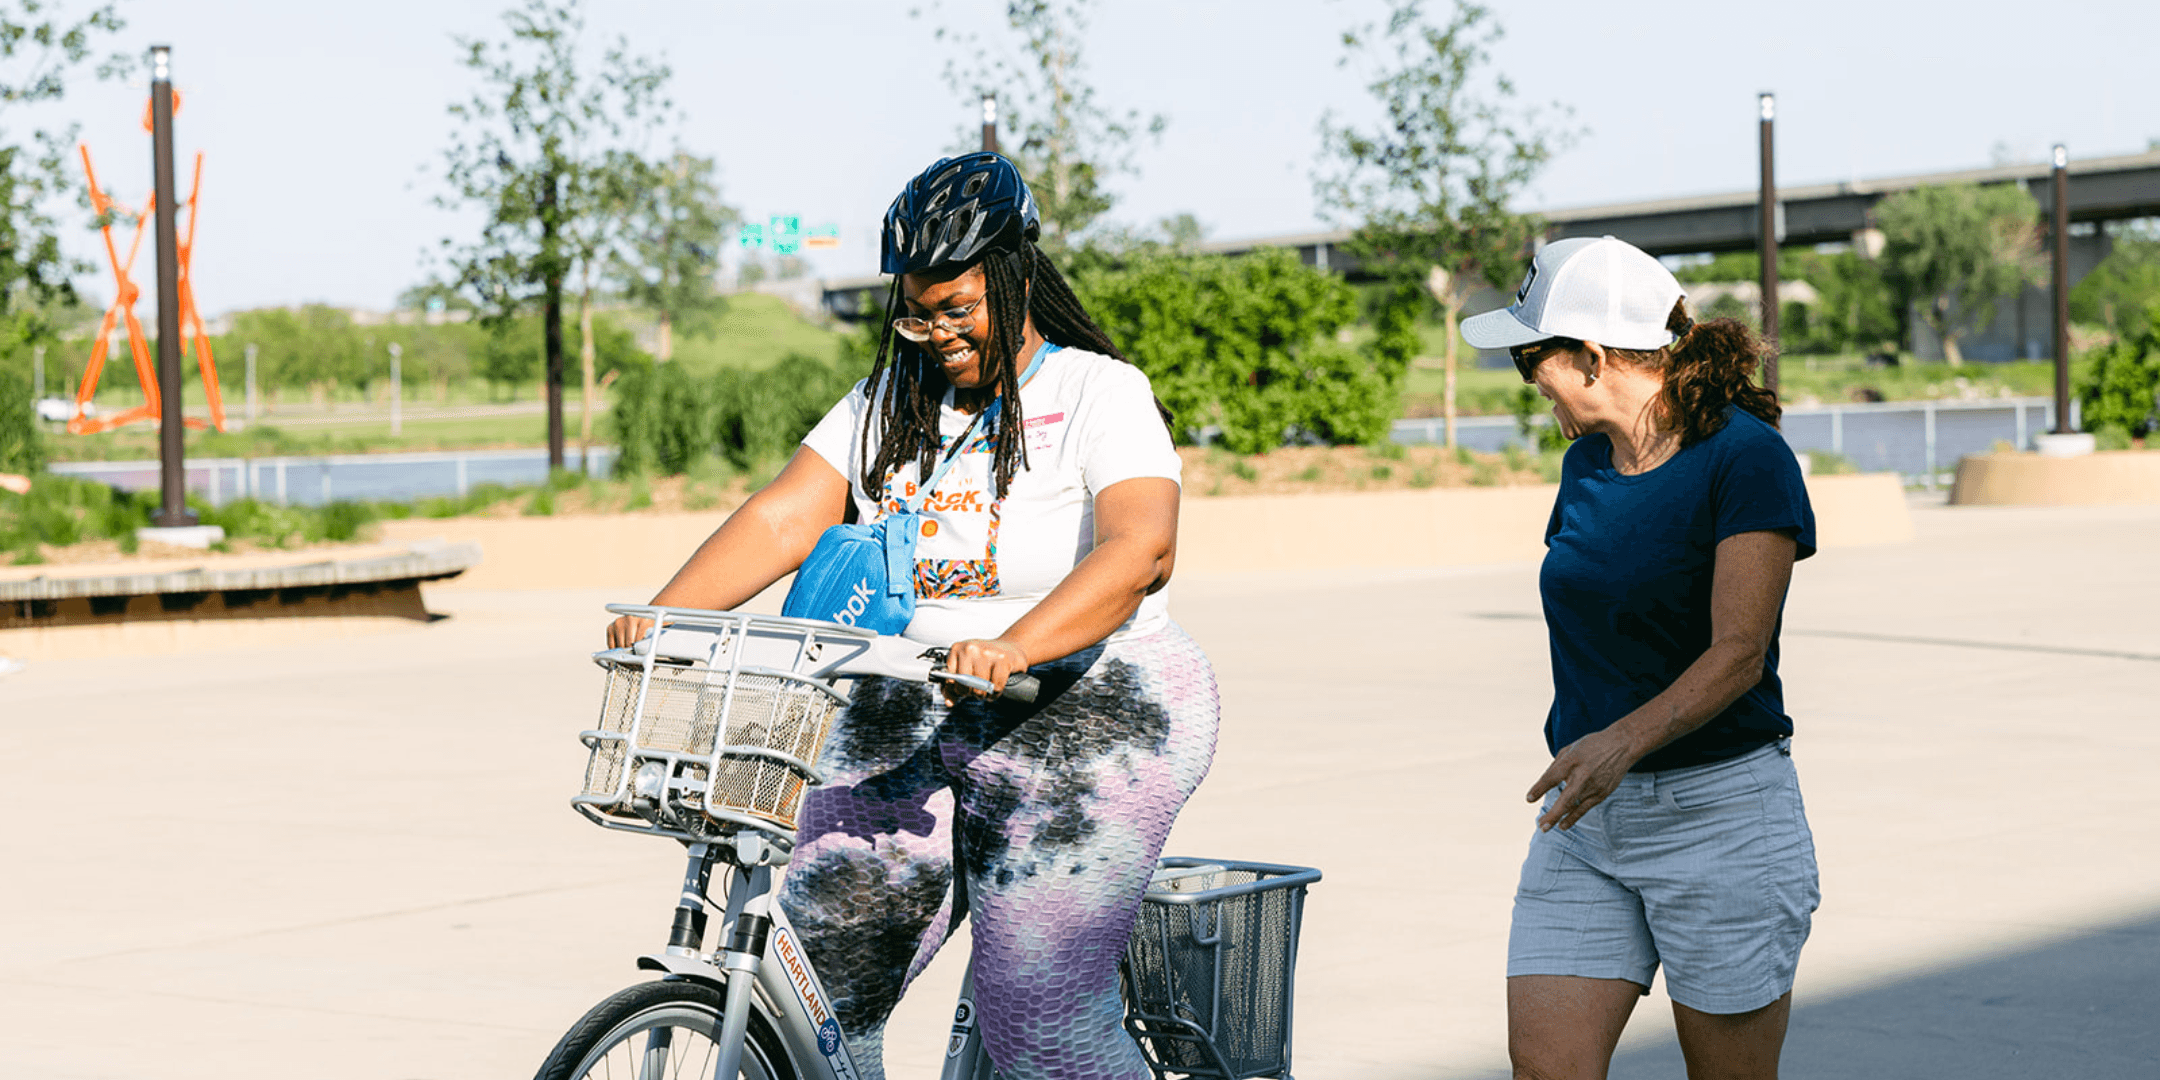 Learn-to-Ride Classes